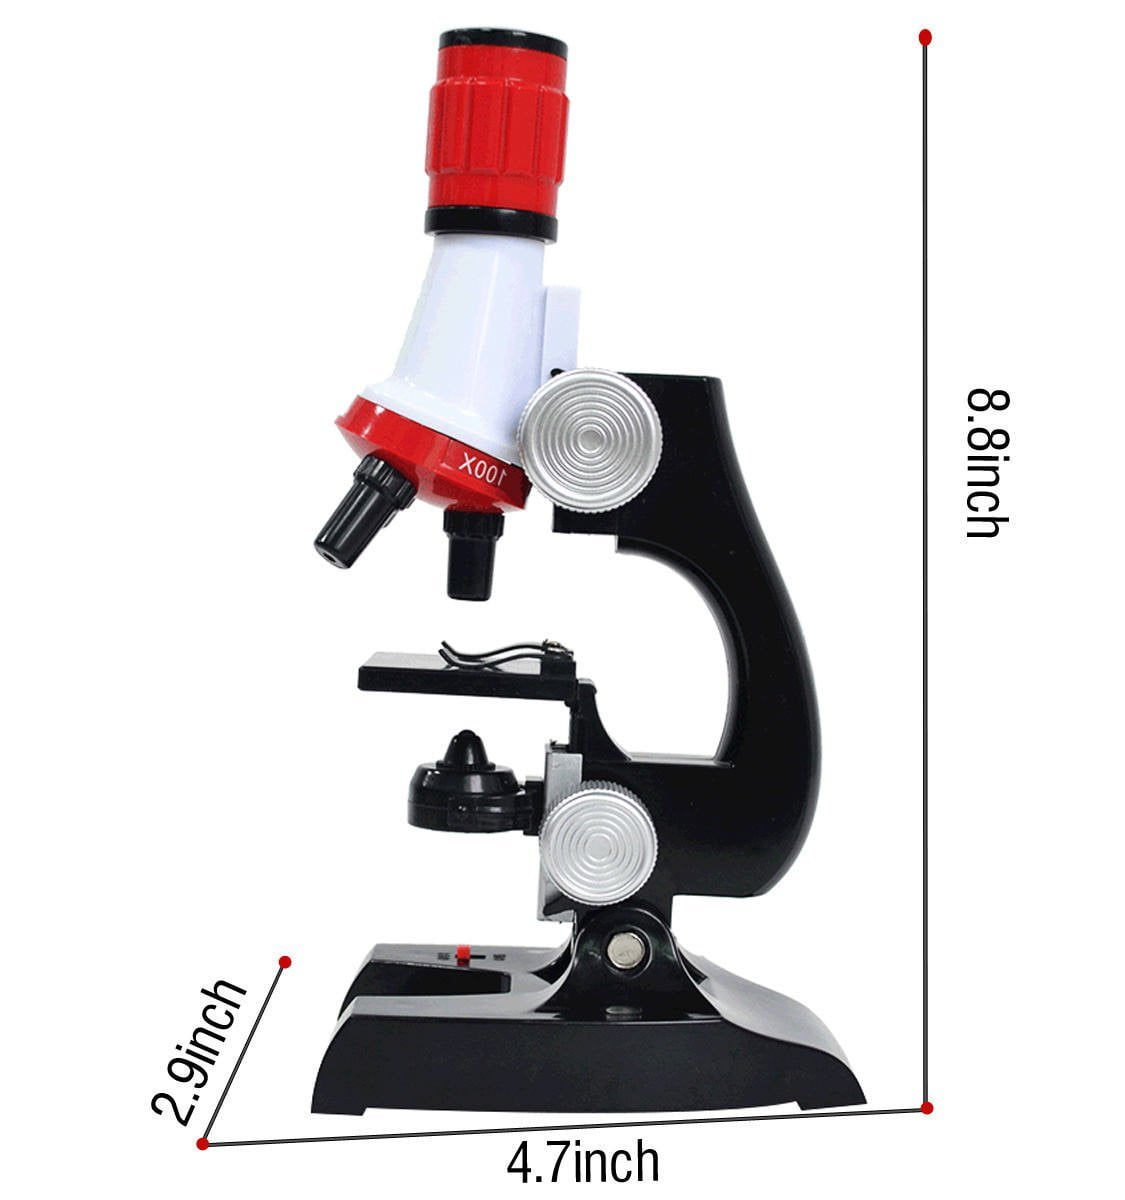 Kids Beginner Toy Microscopio with LED 100X 400x Microscope for Kids My First Teaching Microscope Science Toy and 1200x Magnification microscopes,red. 